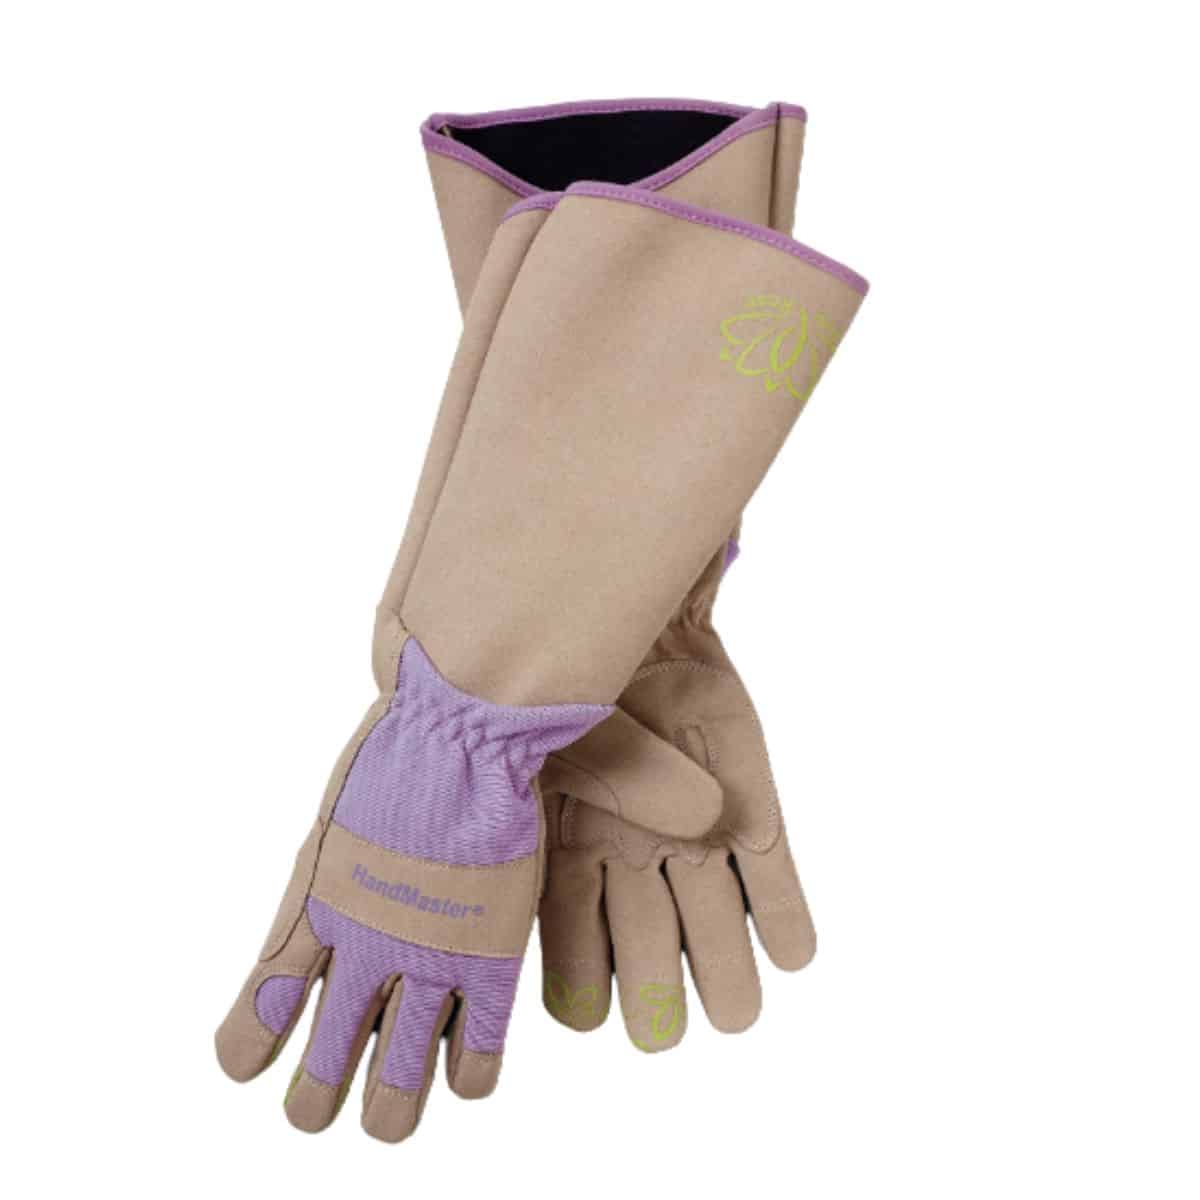 long forearm protection garden gloves light purple and tan text on glove reads hand master available at Amazon